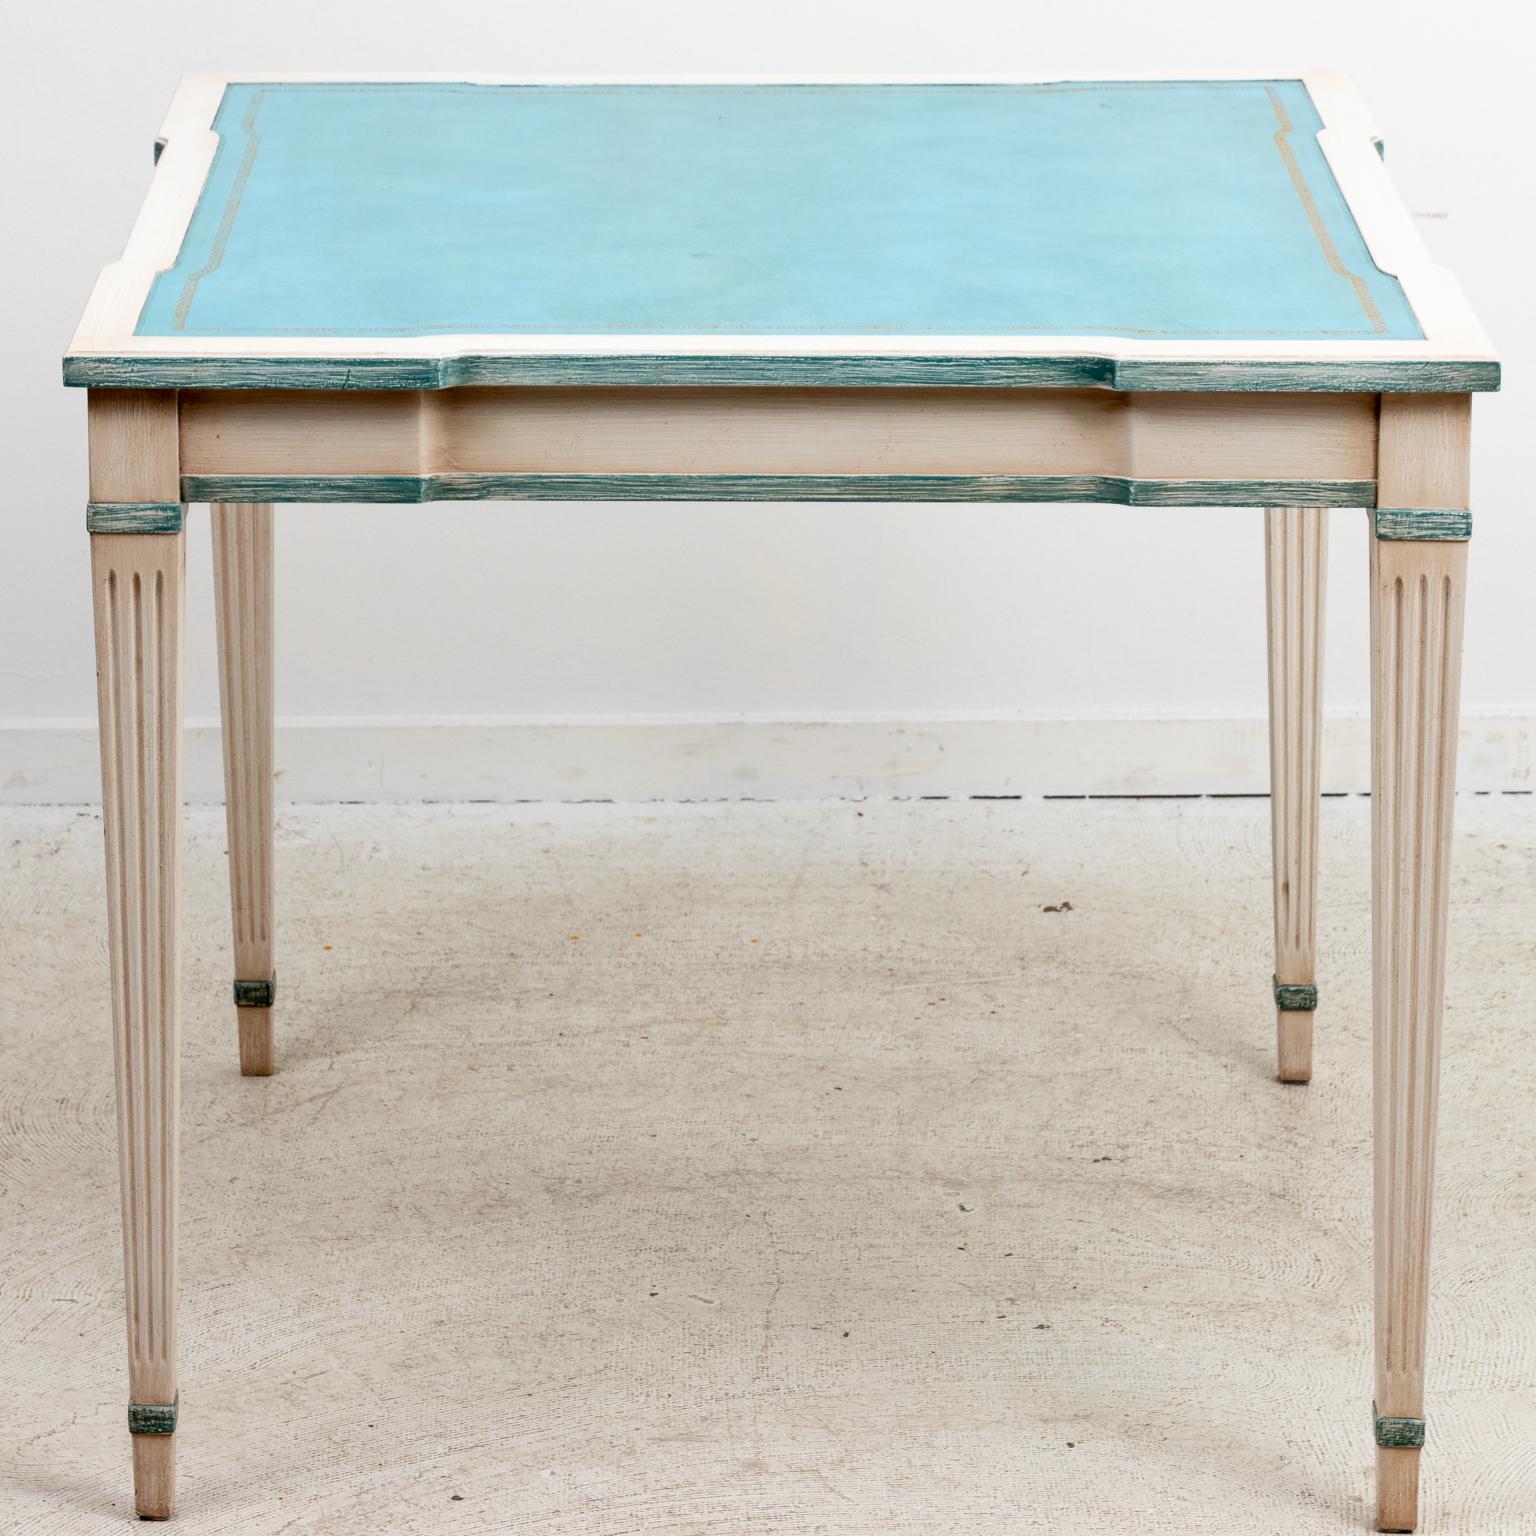 Circa 1940s French painted Louis XVI style white game table with aqua blue tooled leather top and fluted, tapered legs with aqua blue color accents over off white patina. Made in France. Please note of wear consistent with age including slight